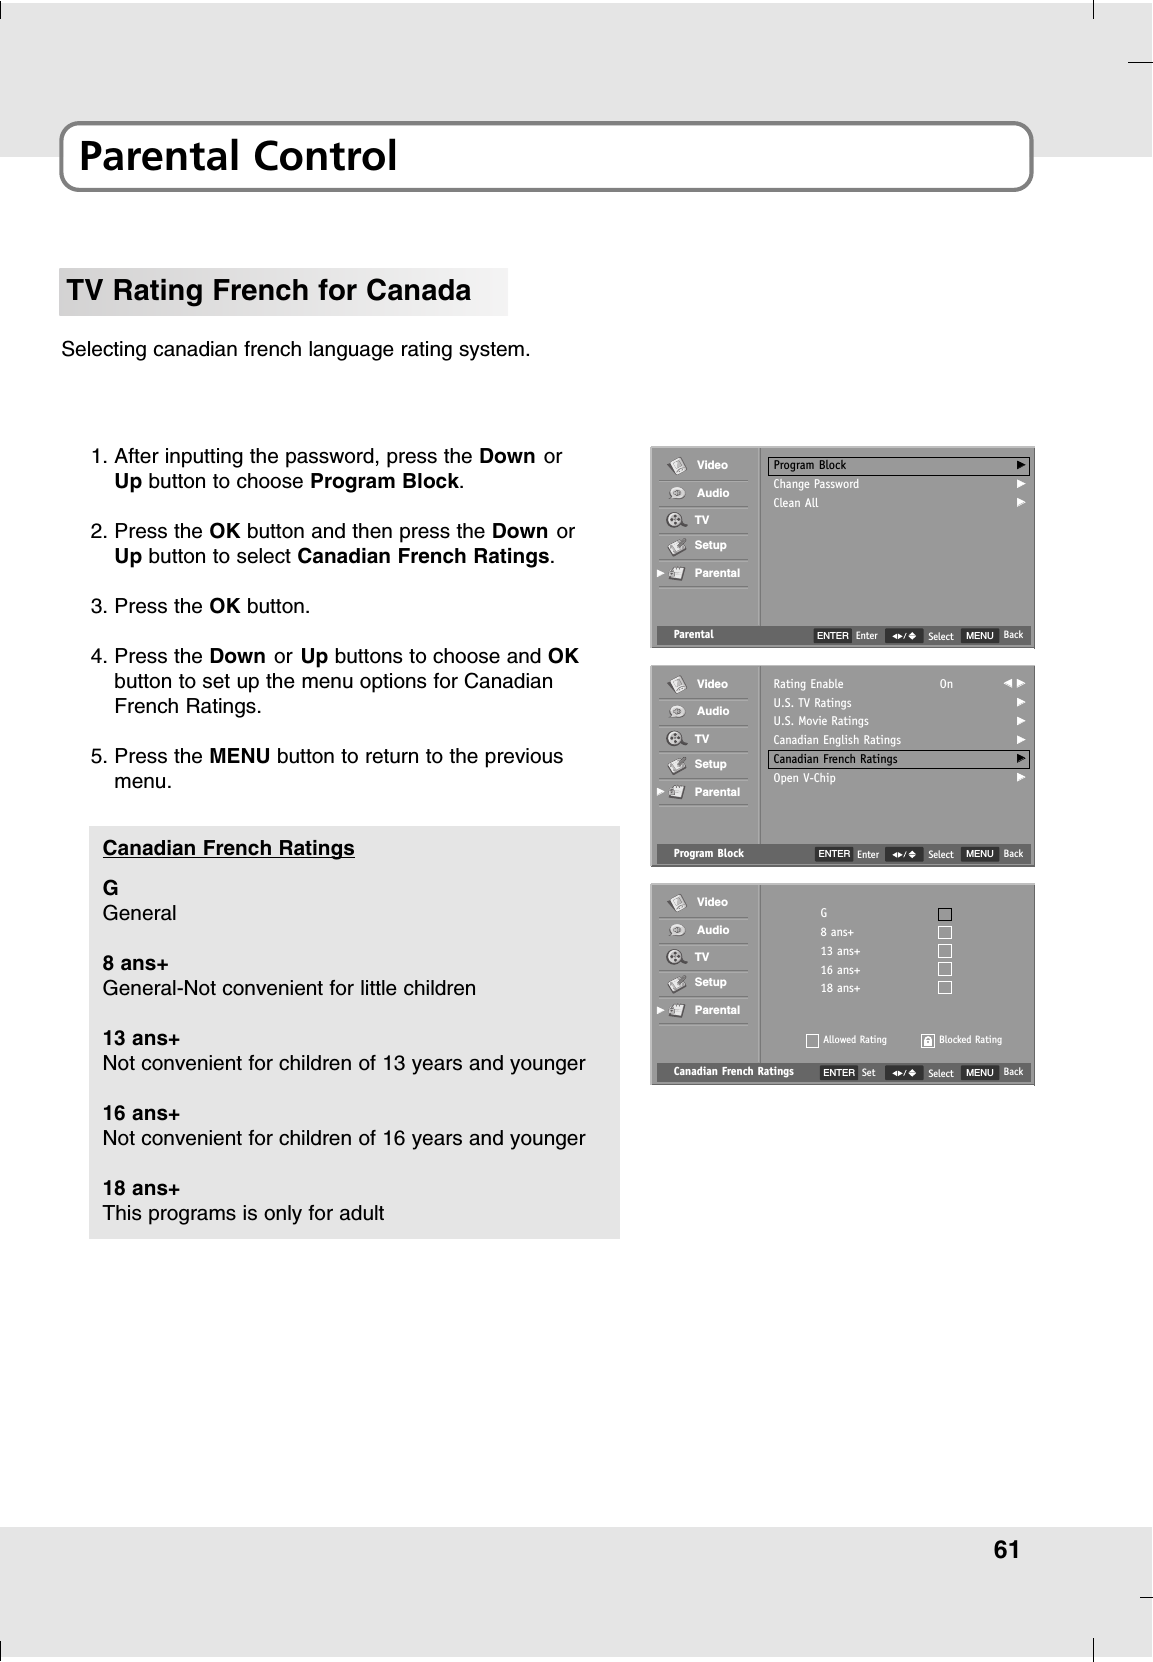 61Parental ControlTV Rating French for CanadaSelecting canadian french language rating system.1. After inputting the password, press the Down orUp button to choose Program Block.2. Press the OK button and then press the Down orUp button to select Canadian French Ratings.3. Press the OK button.4. Press the Down or Up buttons to choose and OKbutton to set up the menu options for CanadianFrench Ratings.5. Press the MENU button to return to the previousmenu.Canadian French Ratings MENU BackSelectG8 ans+13 ans+16 ans+18 ans+Allowed RatingVideoAudioTVSetupParentalGGBlocked RatingENTER SetGGeneral8 ans+General-Not convenient for little children13 ans+Not convenient for children of 13 years and younger16 ans+Not convenient for children of 16 years and younger18 ans+This programs is only for adultCanadian French Ratings Program Block MENU BackSelectRating EnableU.S. TV RatingsU.S. Movie RatingsCanadian English RatingsCanadian French RatingsOpen V-ChipOn FF  GGGGGGGGGGGGVideoAudioTVSetupParentalGGParental MENU BackSelectProgram BlockChange PasswordClean AllGGGGGGVideoAudioTVSetupParentalGGENTER EnterENTER Enter